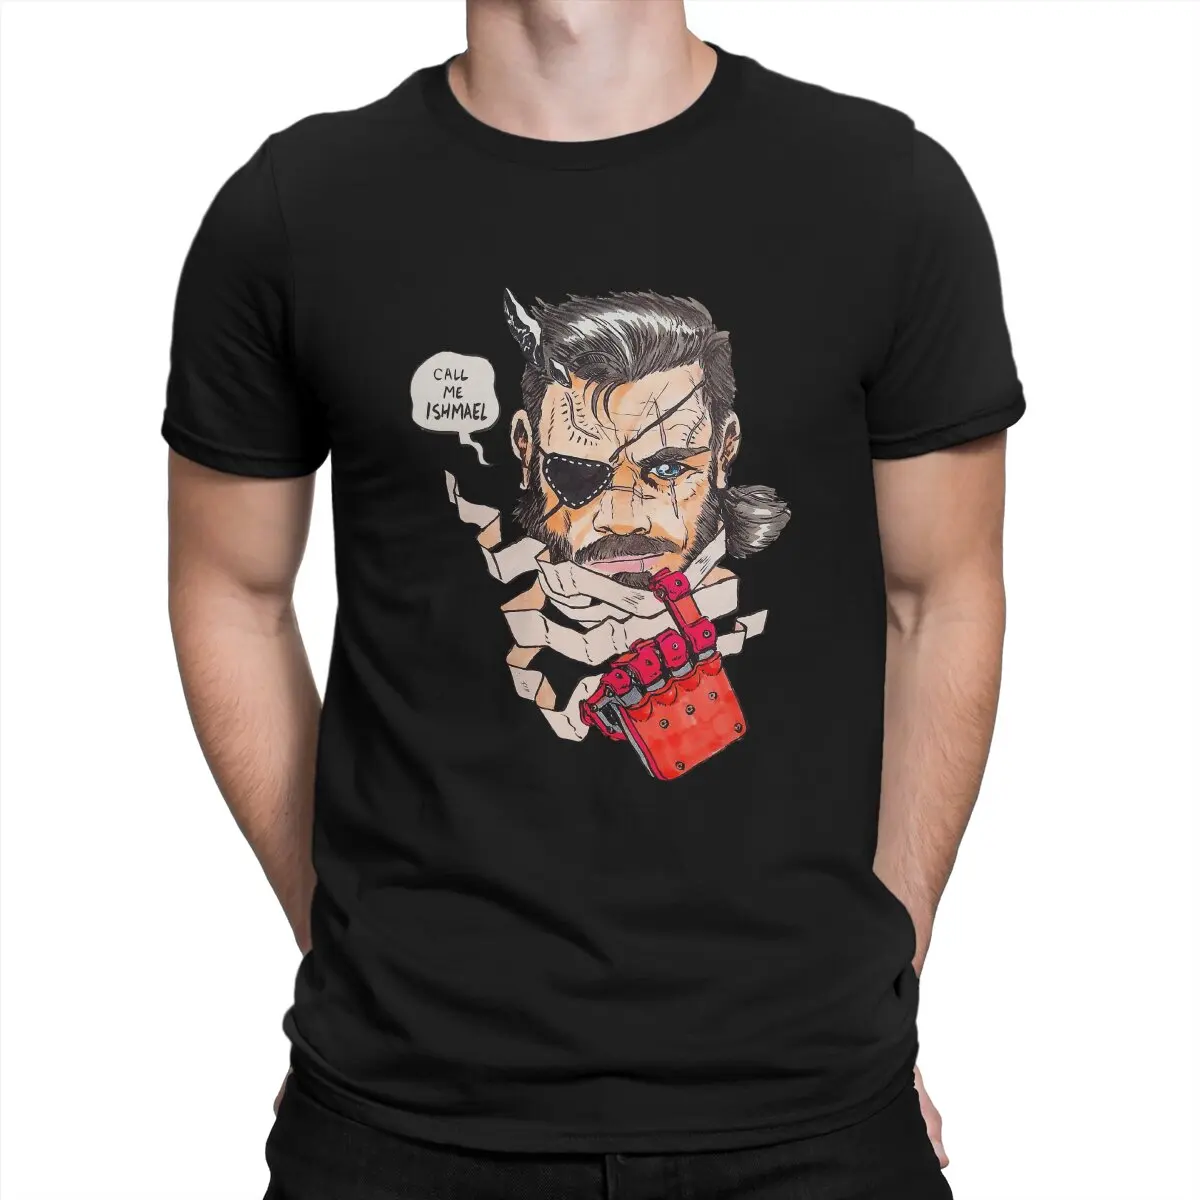 

Call Me I Mean Ishmael T-Shirts for Men Metal Gear Solid V The Phantom Pain Vintage Cotton Tees Round Collar T Shirt 6XL Tops